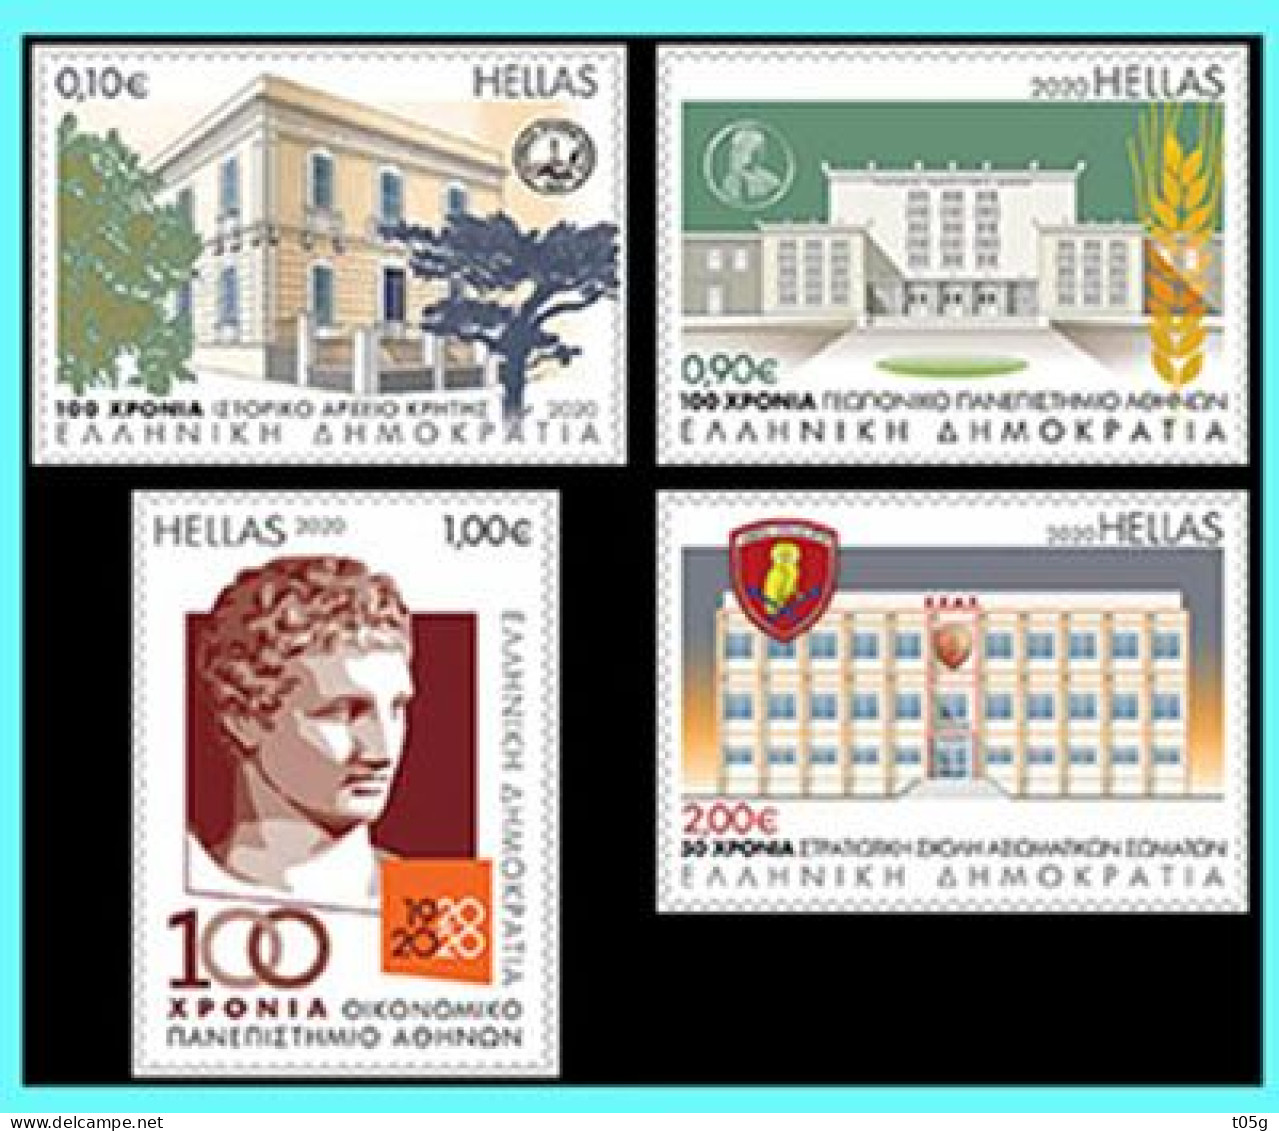 GREECE- GRECE- HELLAS 2020: 21 -05-2020 Annversaries And Eventss Complete Set MNH** - Unused Stamps